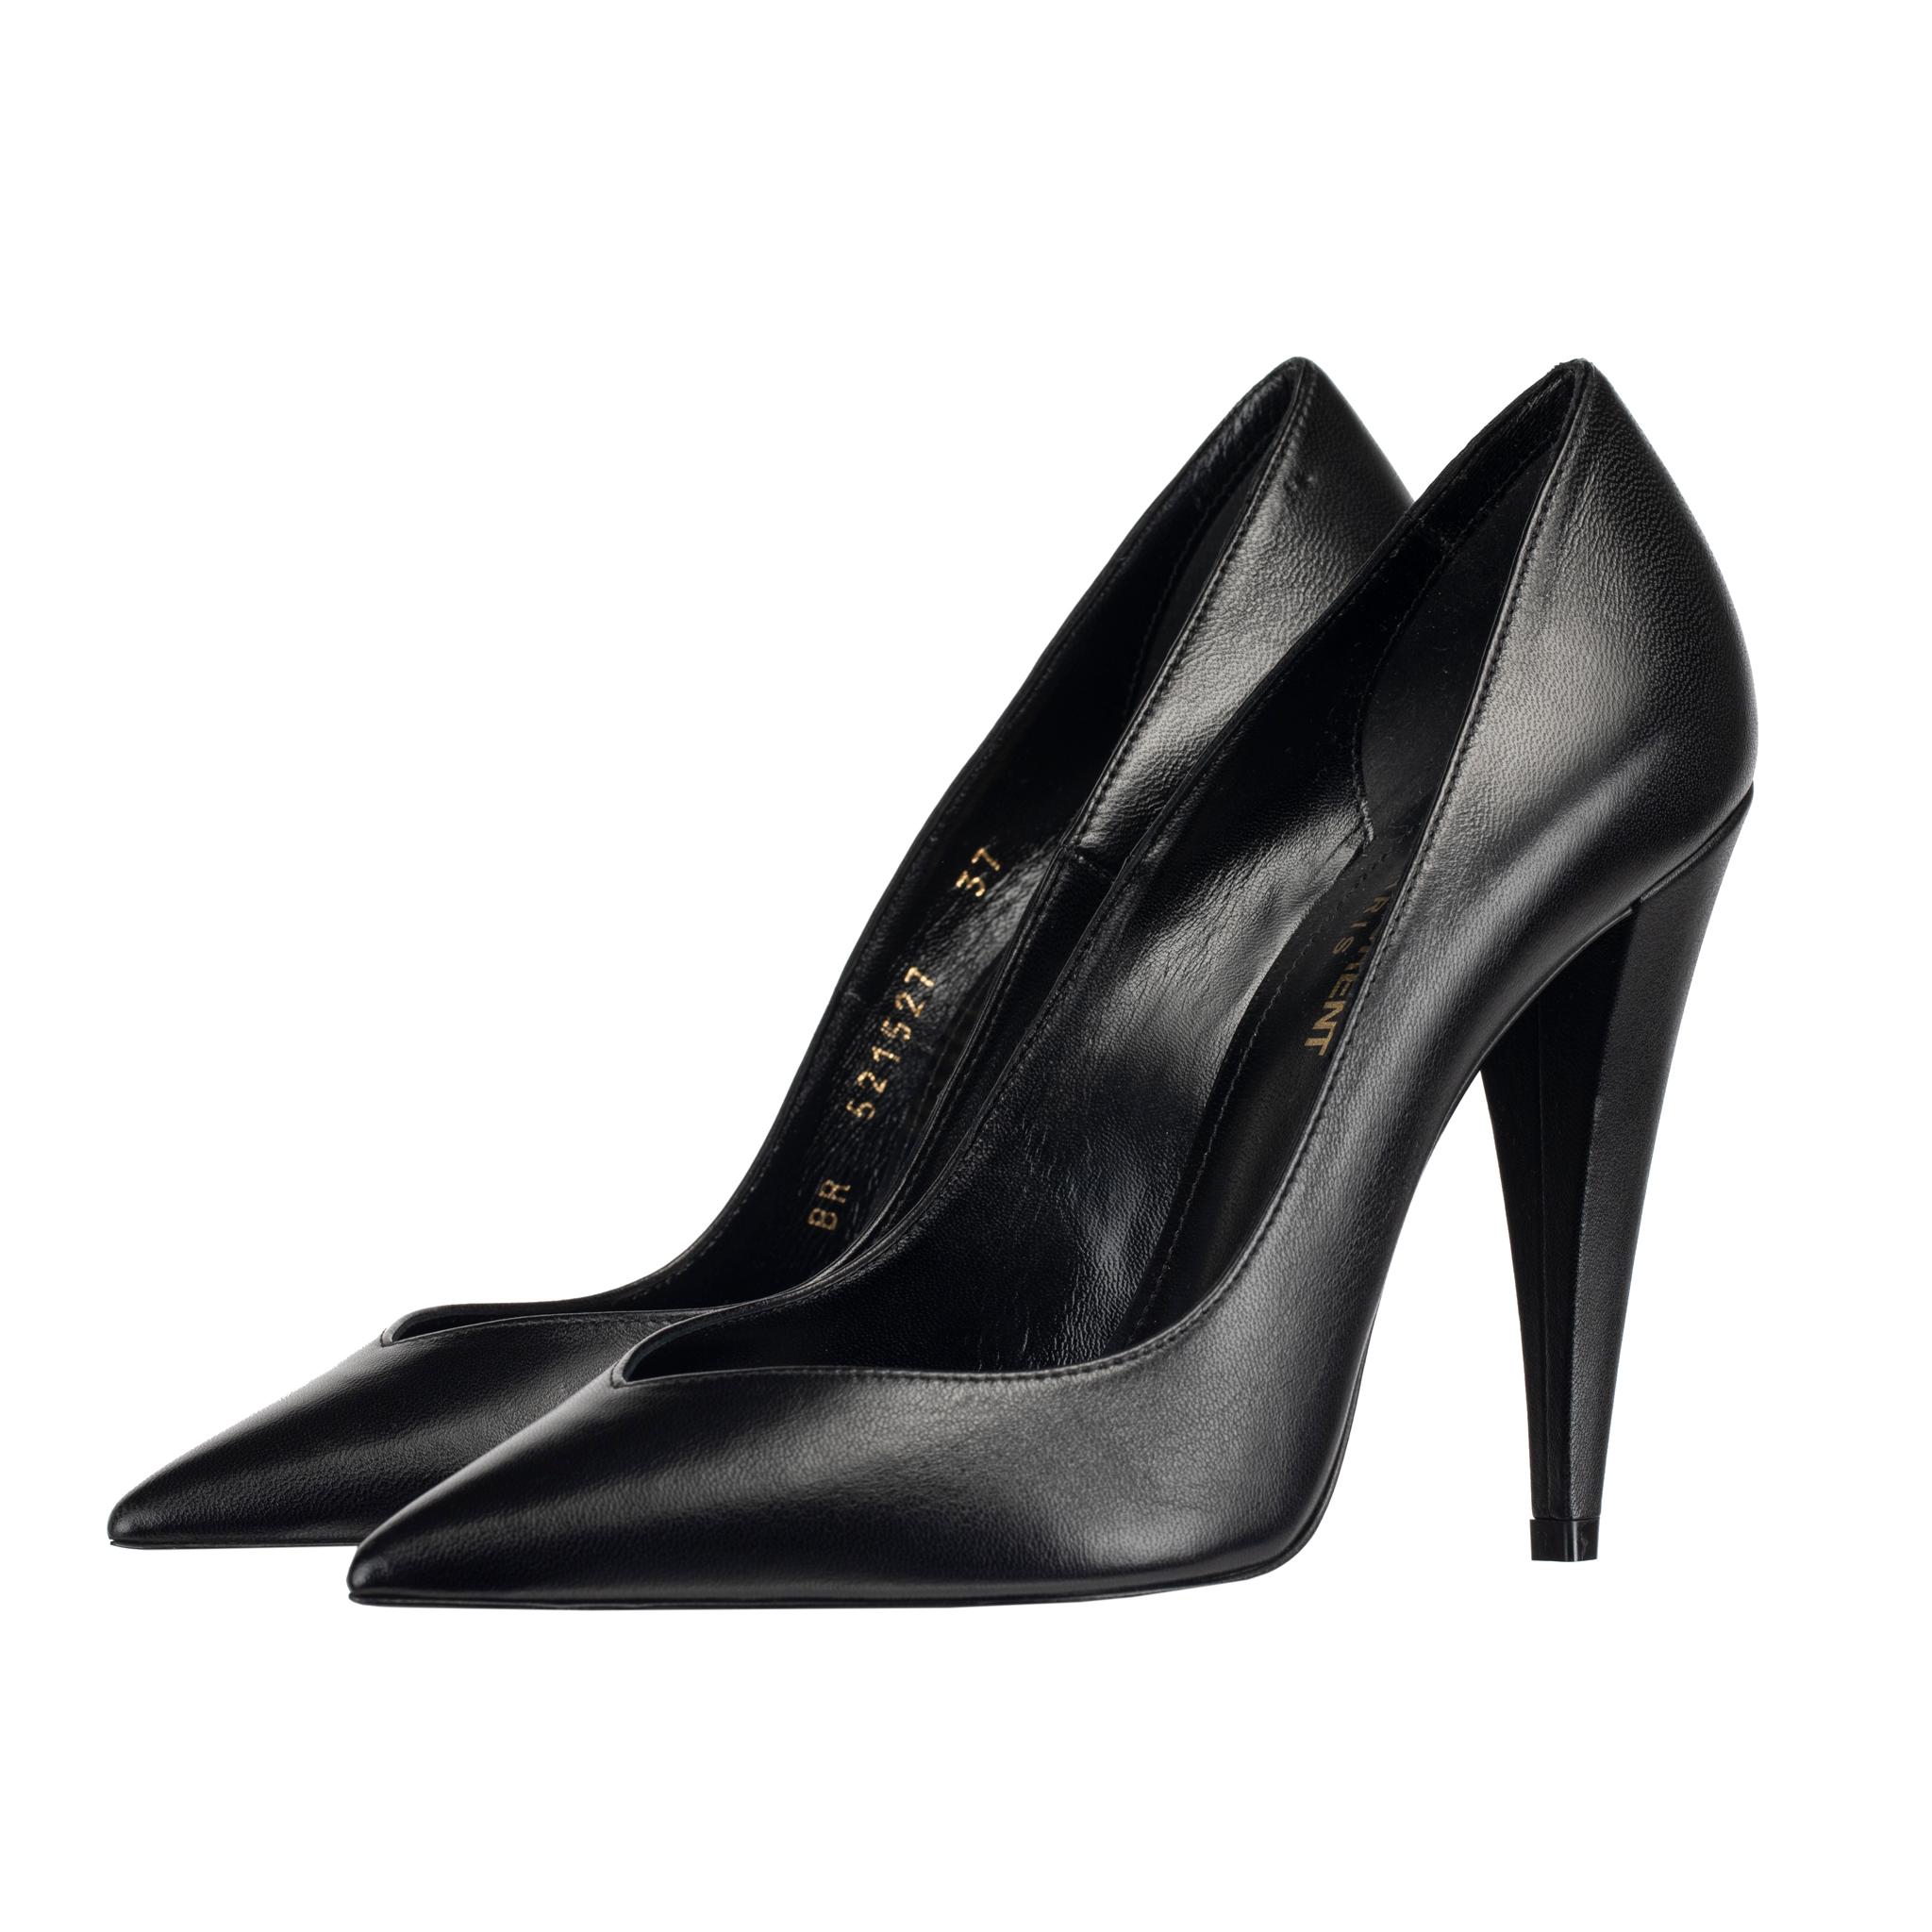 Yves Saint Laurent Decollete Era Black Leather Pumps 37 FR In New Condition For Sale In DOUBLE BAY, NSW